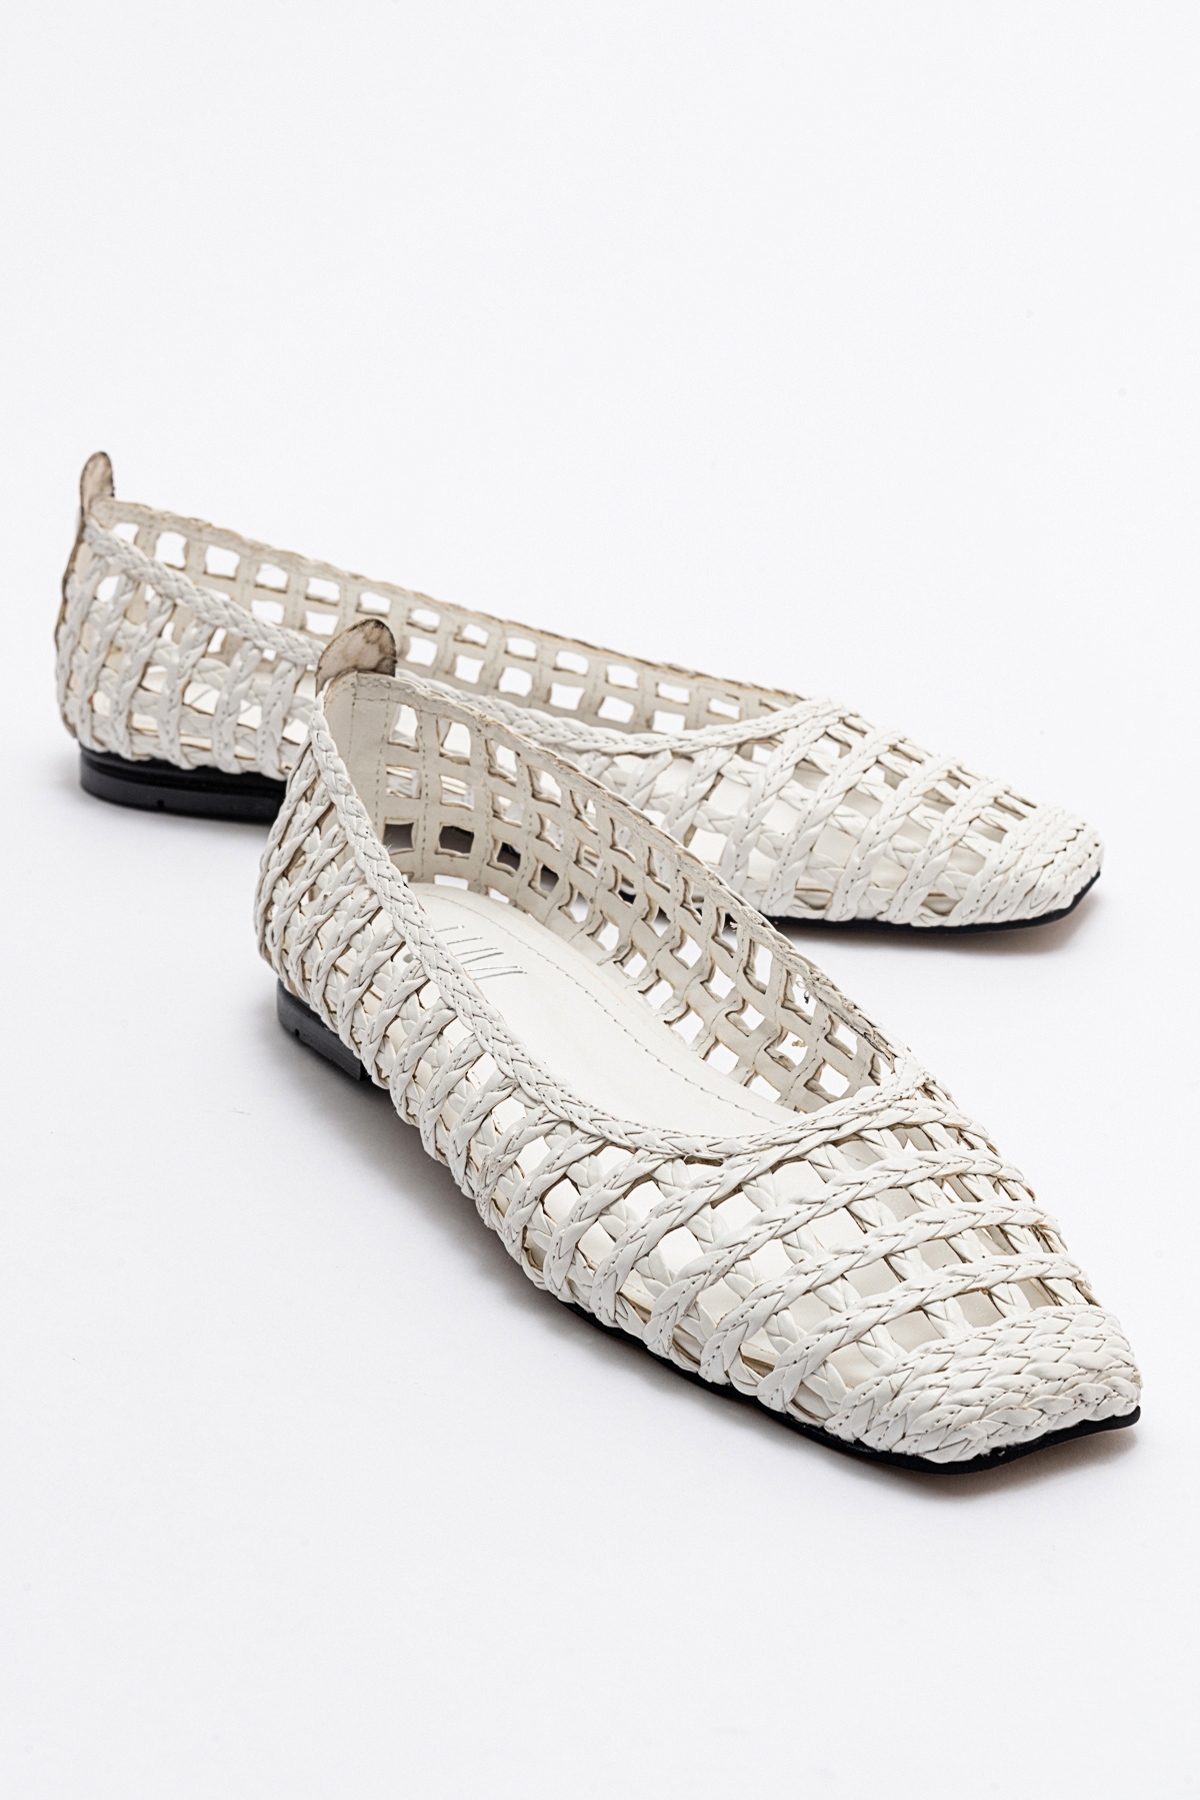 Levně LuviShoes ARCOLA Women's White Knitted Patterned Flats